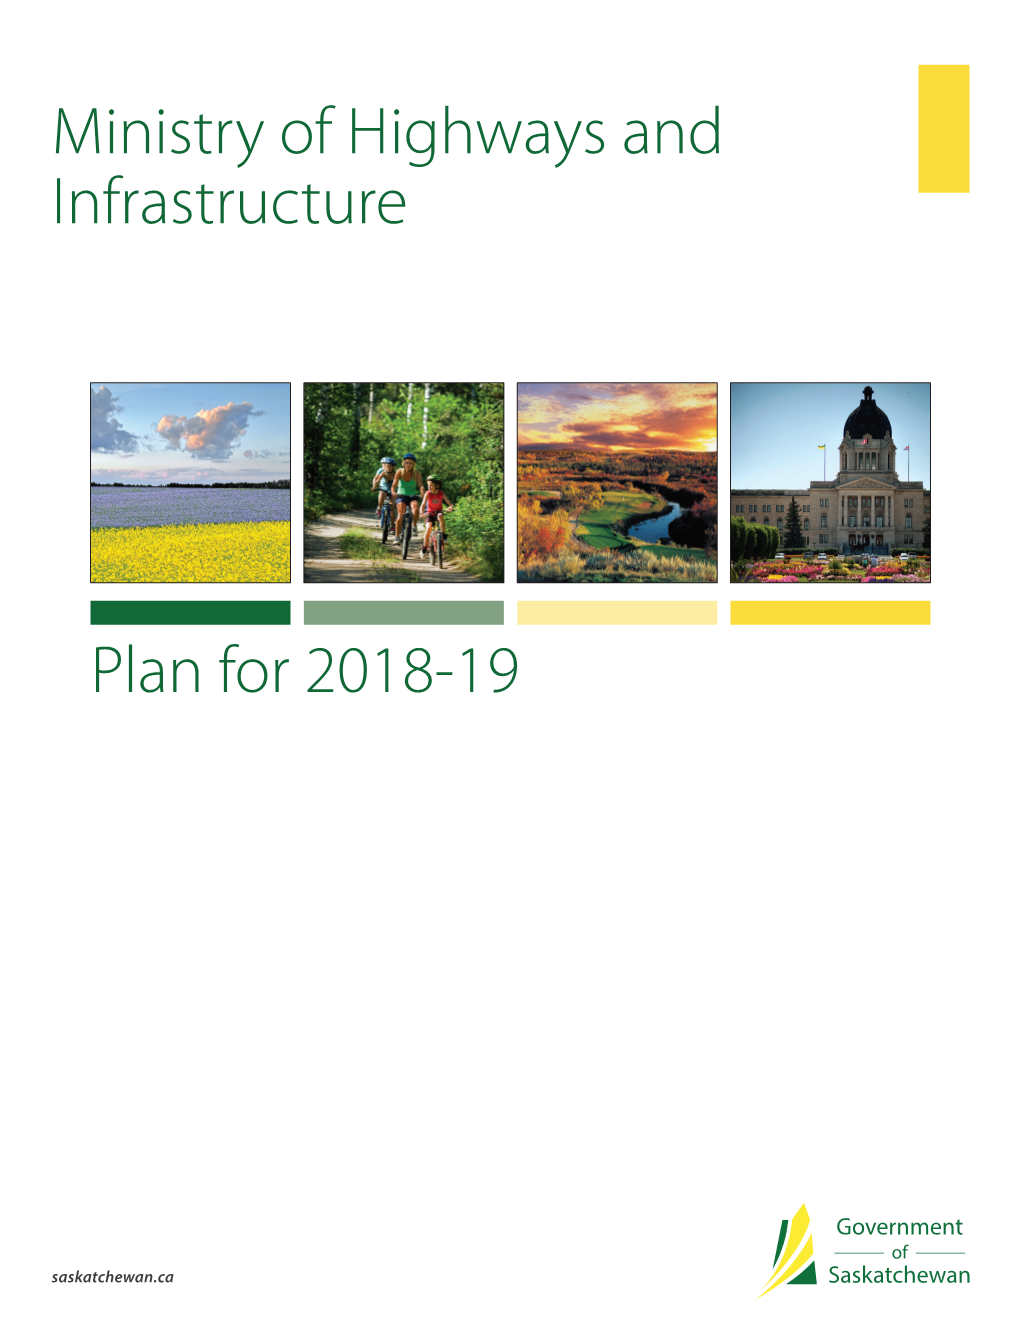 Plan for 2018-19 Ministry of Highways and Infrastructure